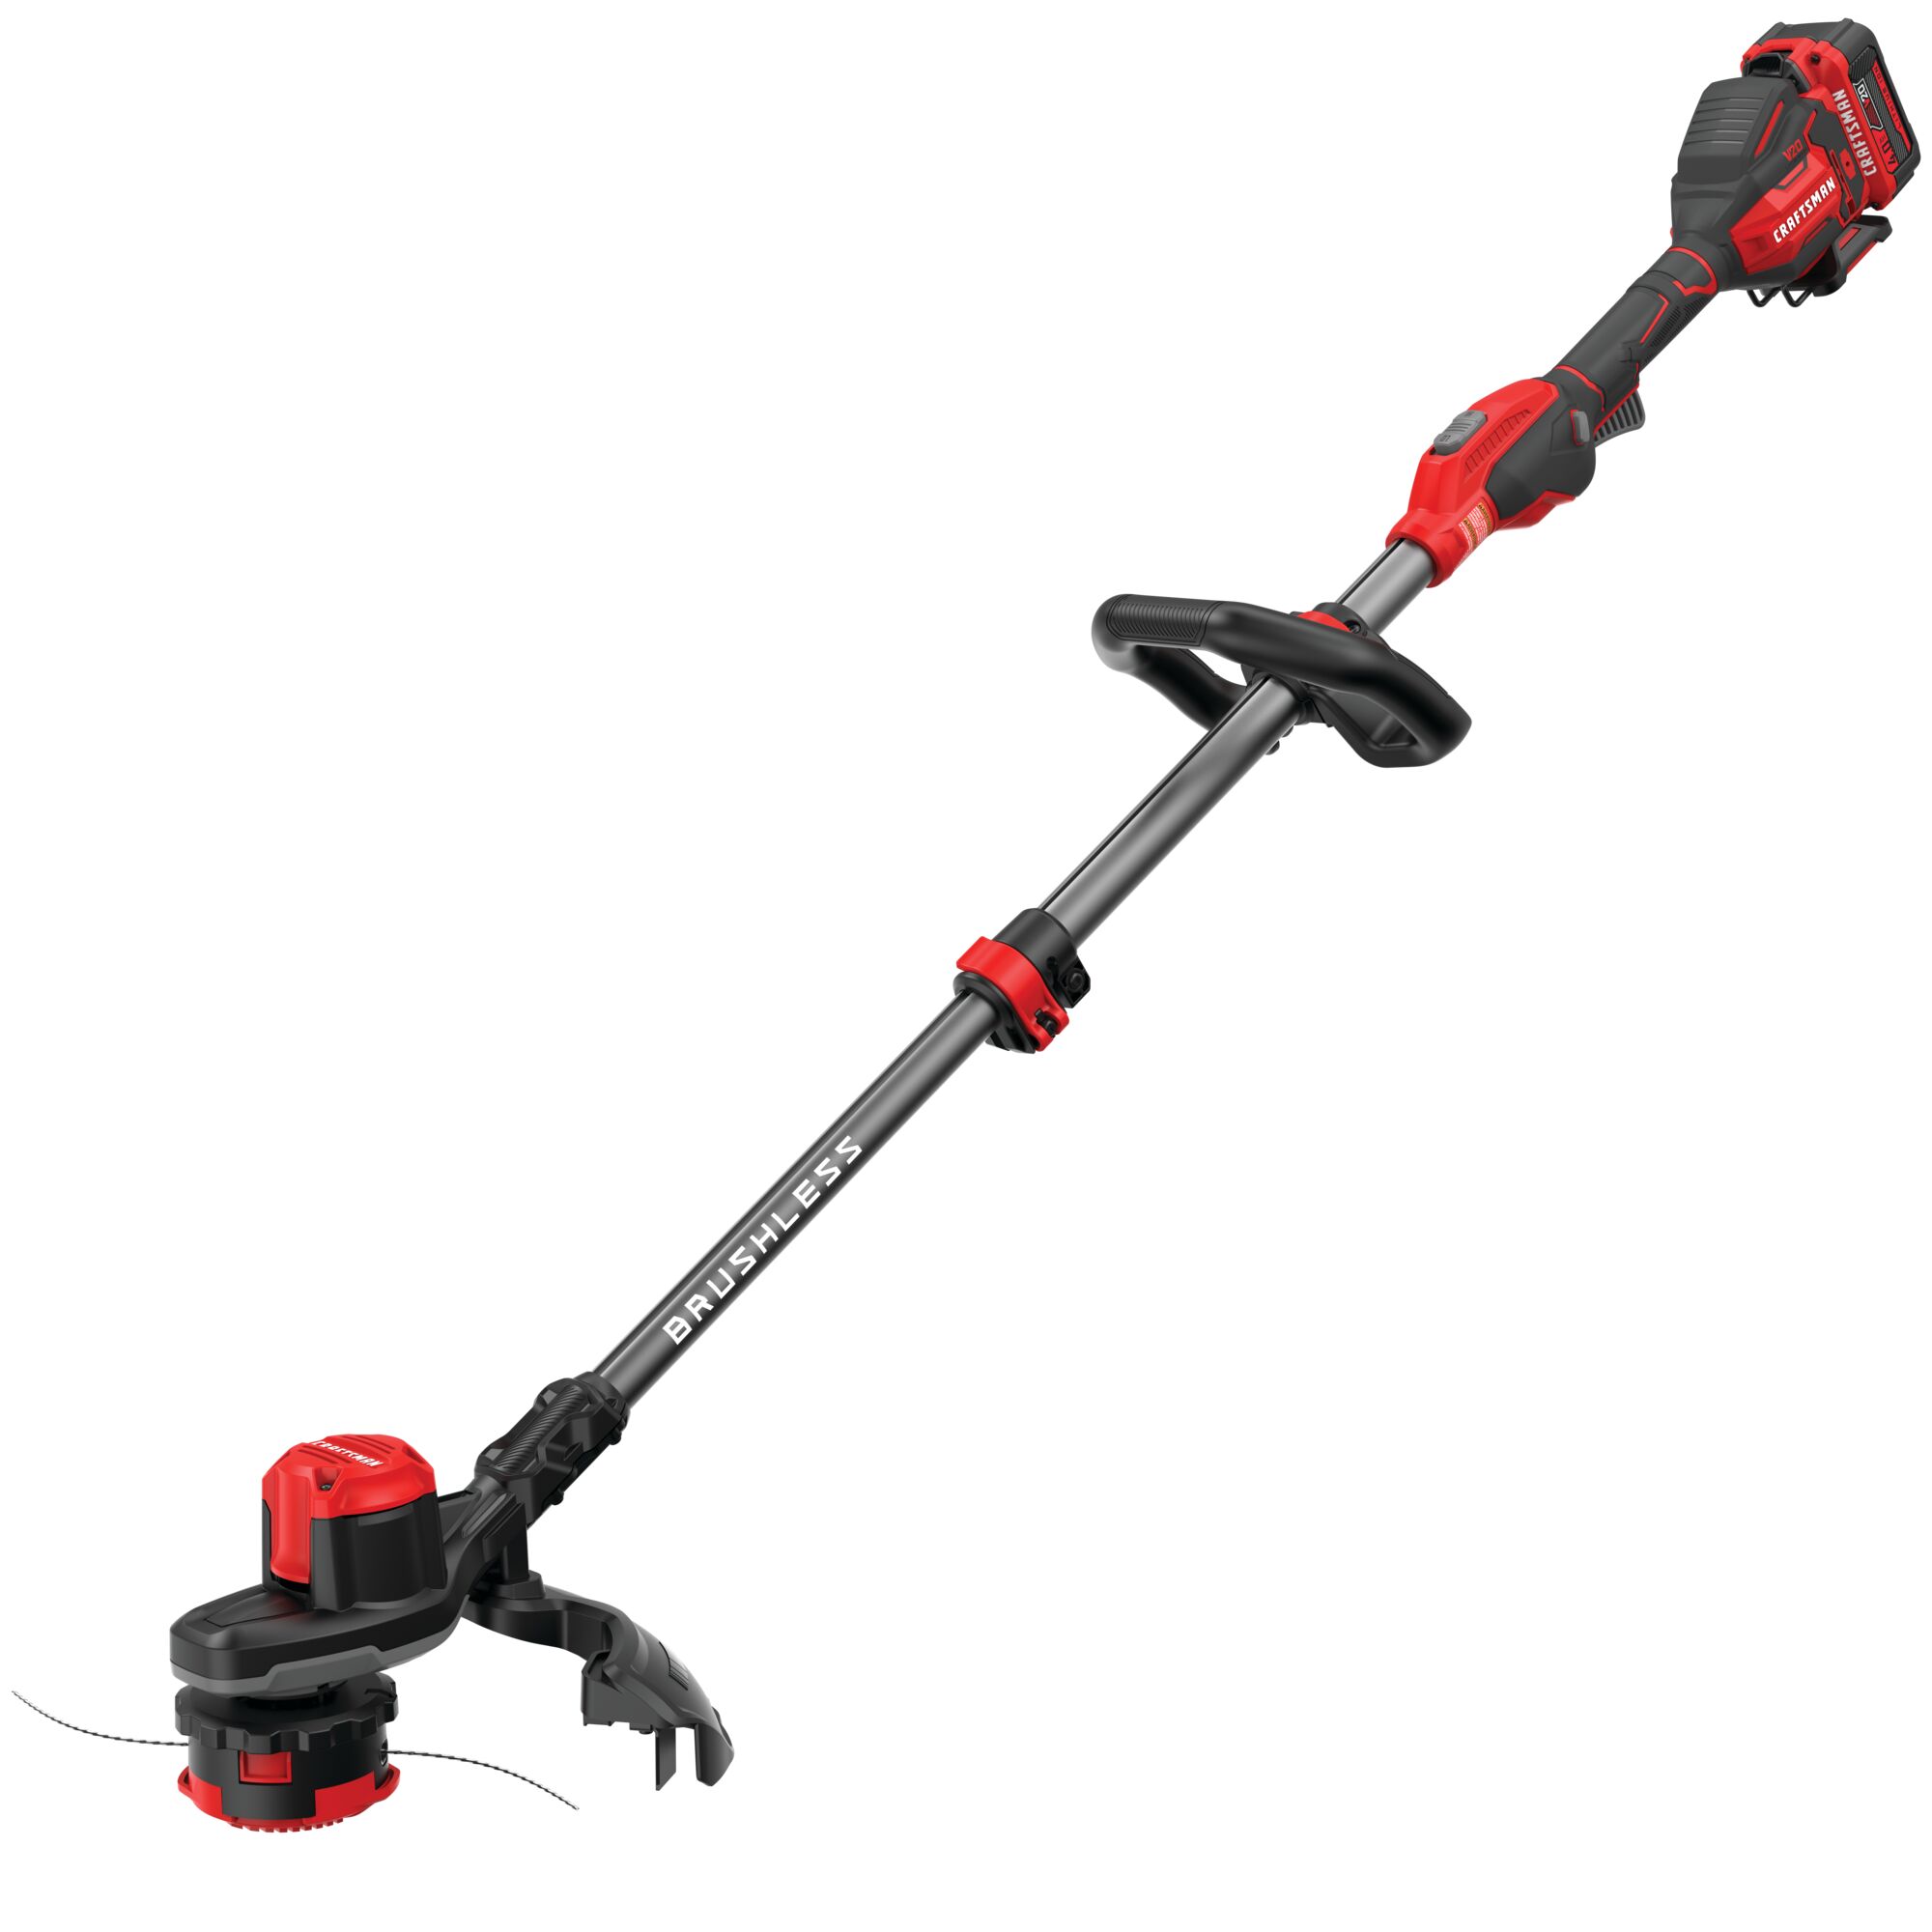 Weed wacker brushless cordless axial blower 4 amp hour.